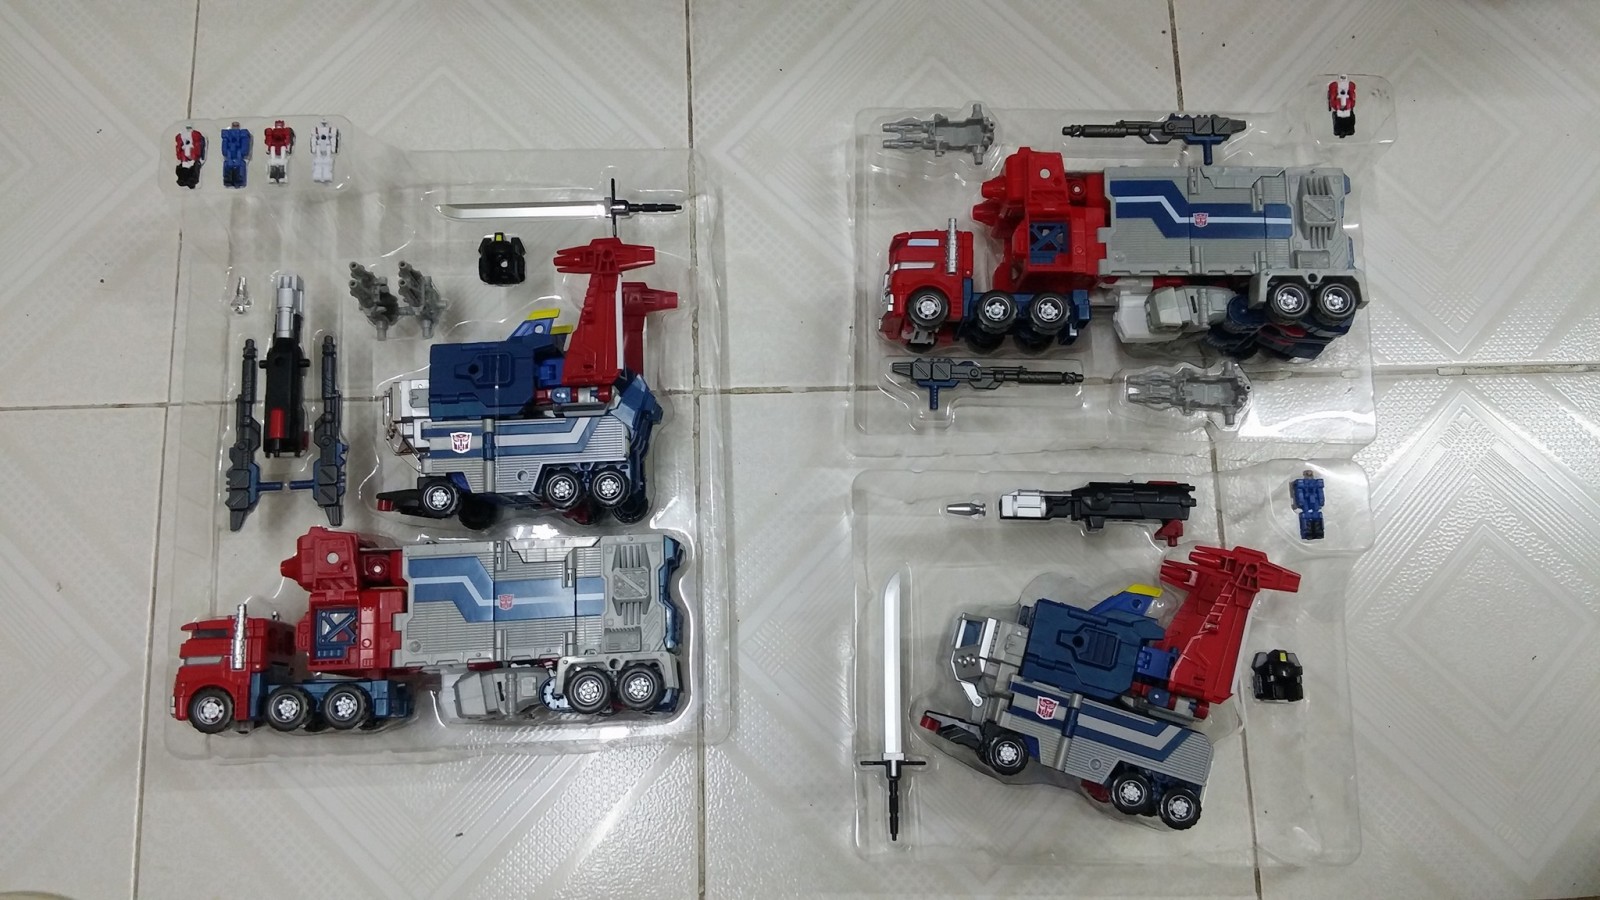 Transformers News: In-Hand Images of Takara Tomy Transformers Legends LG-EX God Ginrai